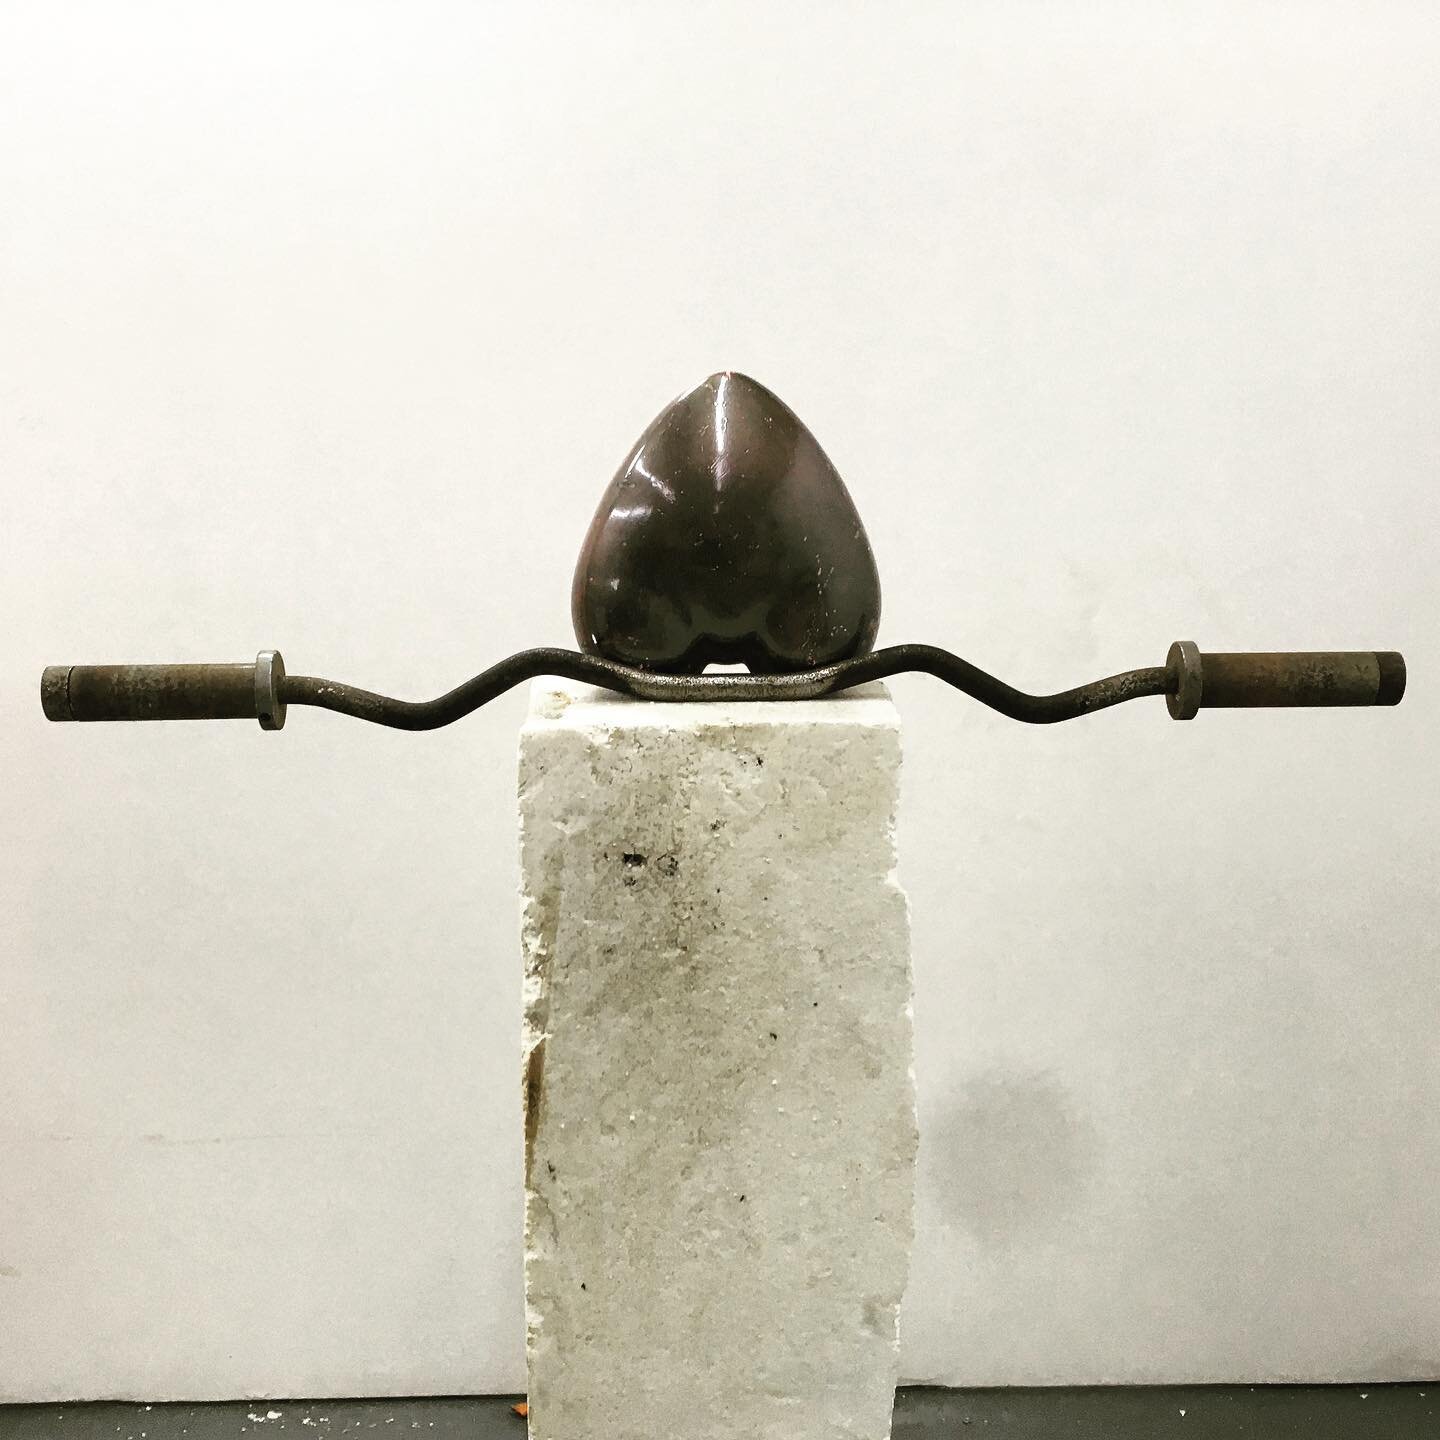 Necronomicon ( rusty Ez bar &amp; bronze pelvis )
.
.
.

Builds size and in a controlling tempo. Get big, gain Strength! Main Muscle Worked: Biceps. Don't risk doing a workout improperly! Avoid injury and keep your form in check with in-depth instruc